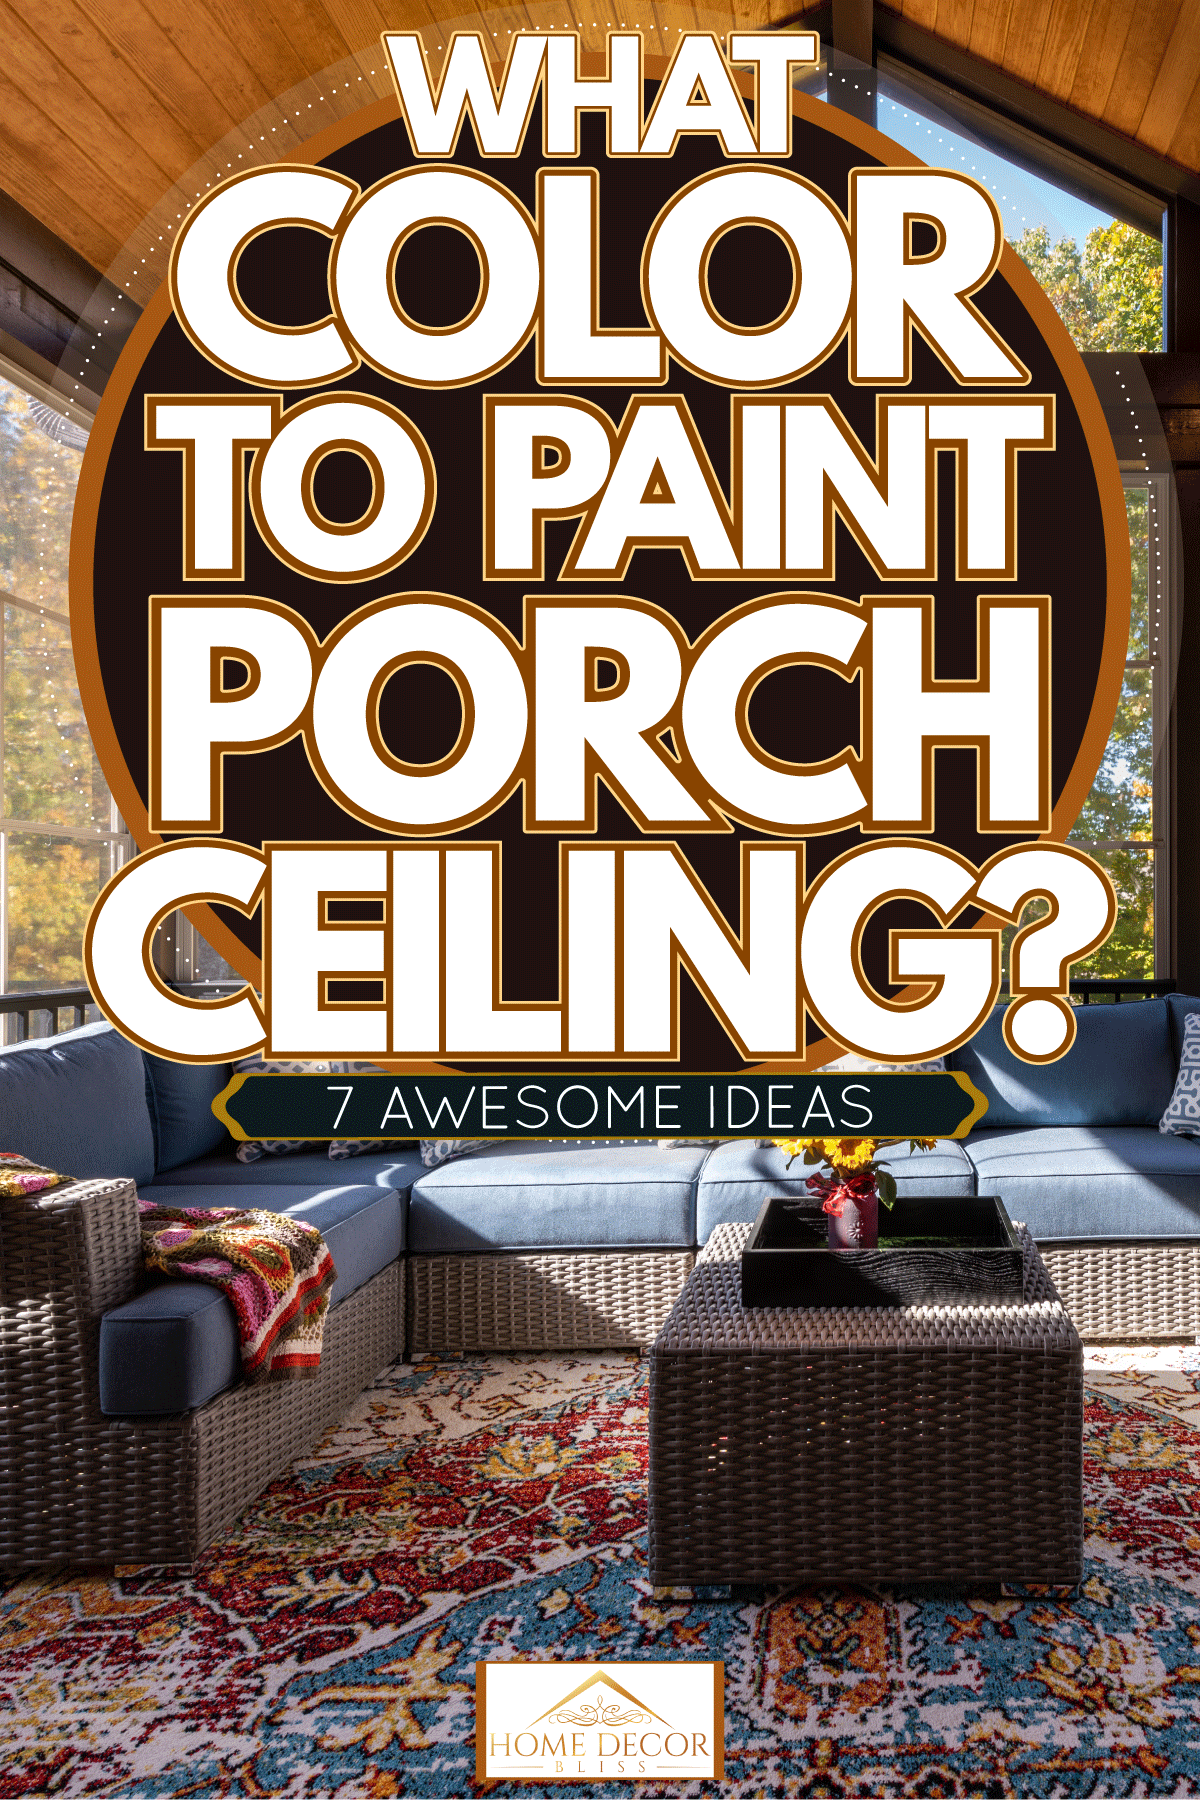 A classic rustic themed porch with wicker sofas matched with blue foam and throw pillows, What Color To Paint Porch Ceiling? [7 Awesome Ideas!]